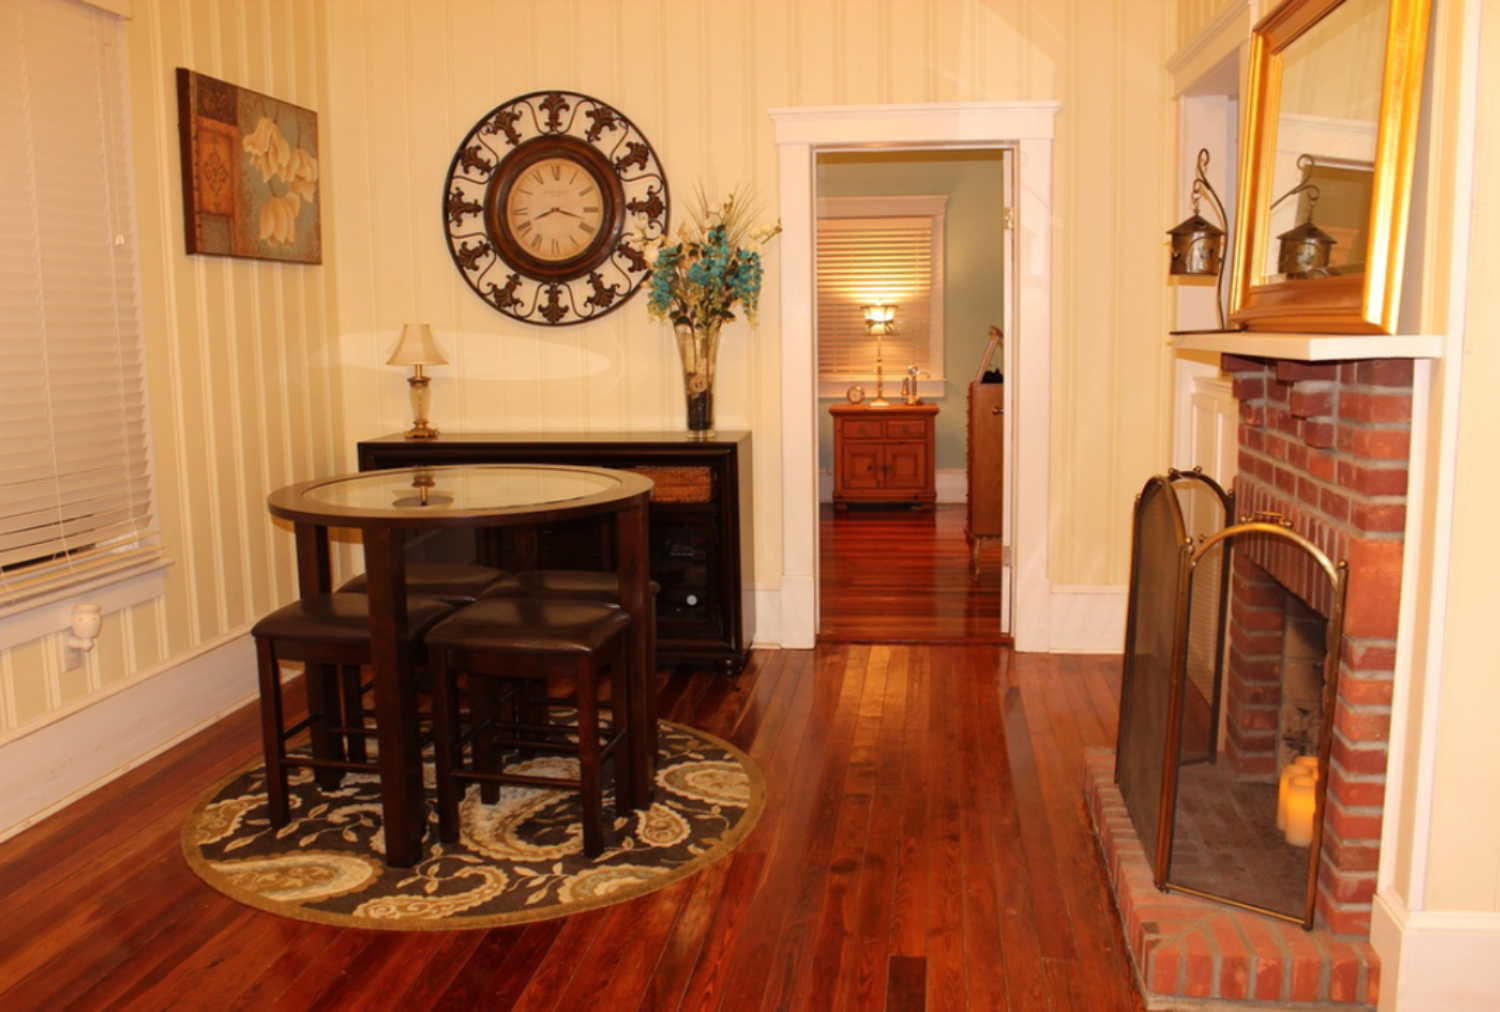 This photo from when the house was listed shows the floors in the front room by the fireplace in excellent condition.